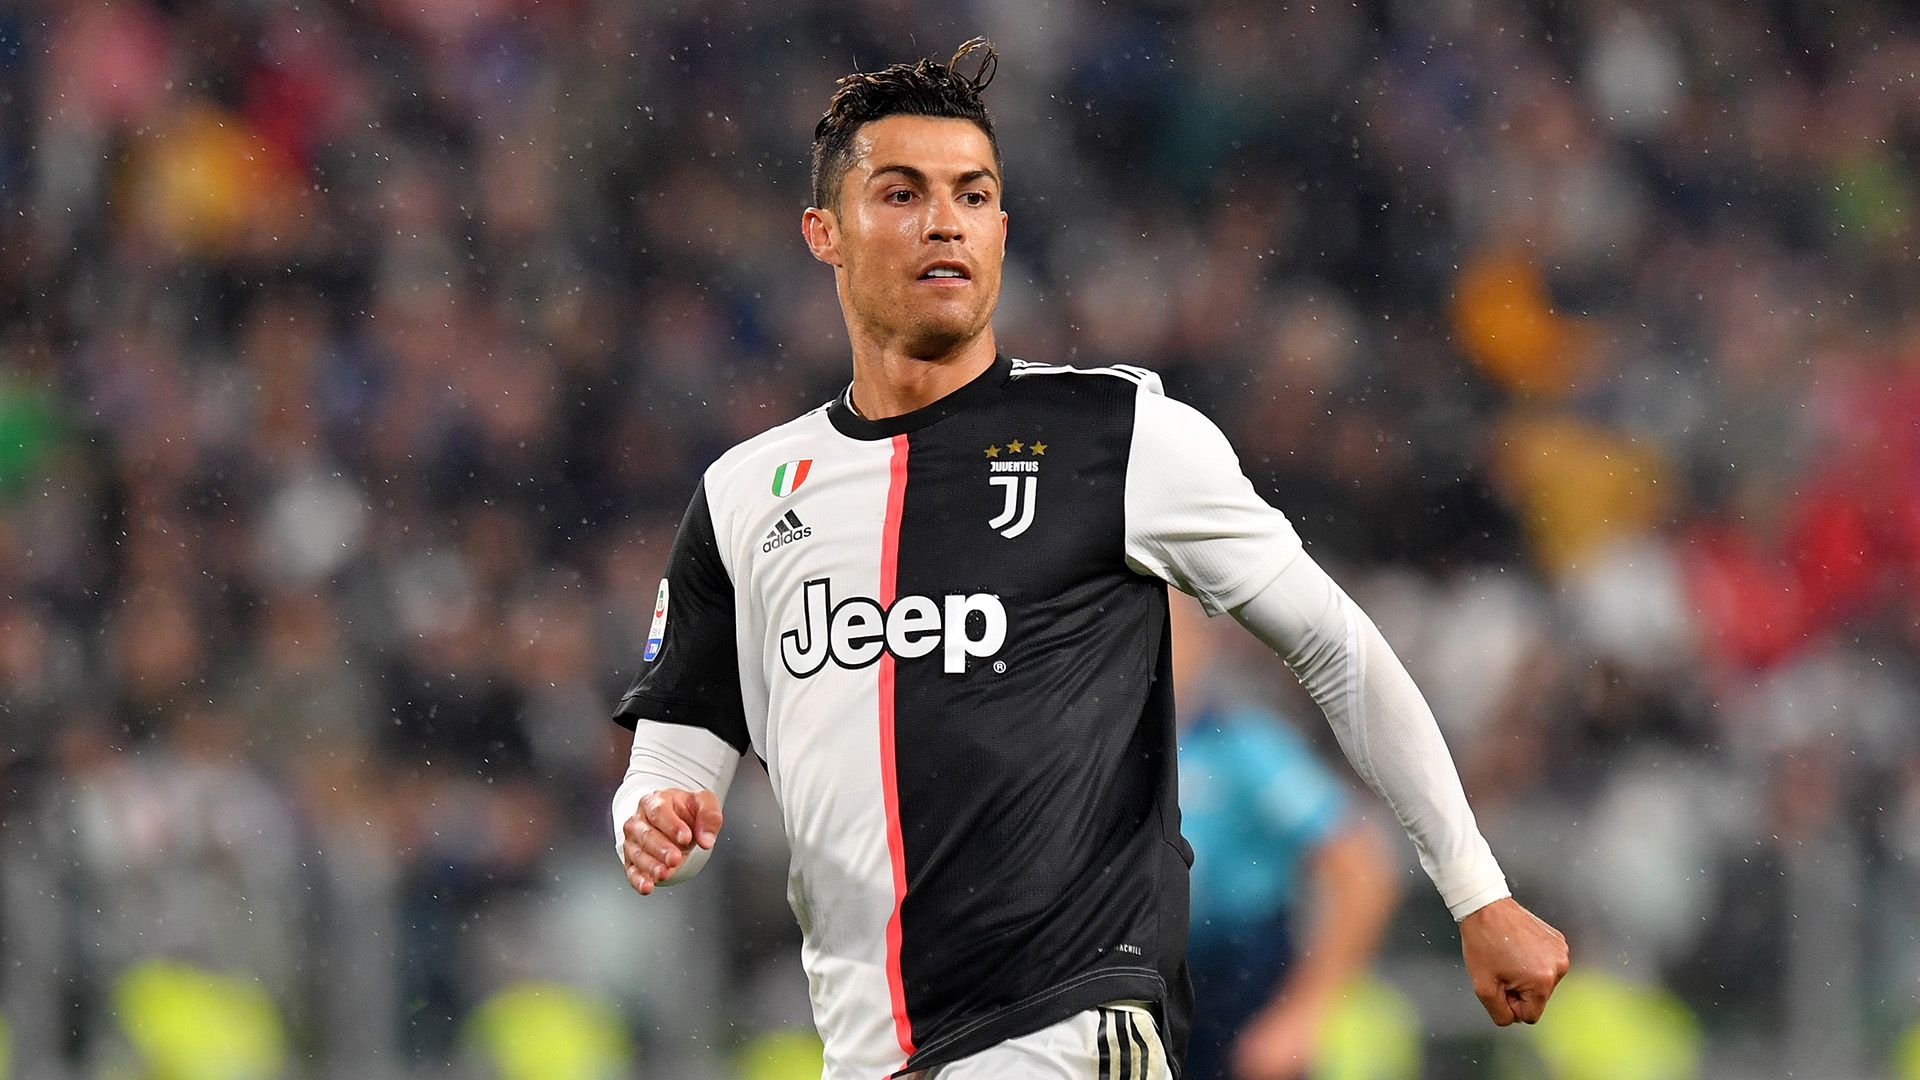 Cristiano Ronaldo News: Juventus striker loses out on Serie A Golden Boot